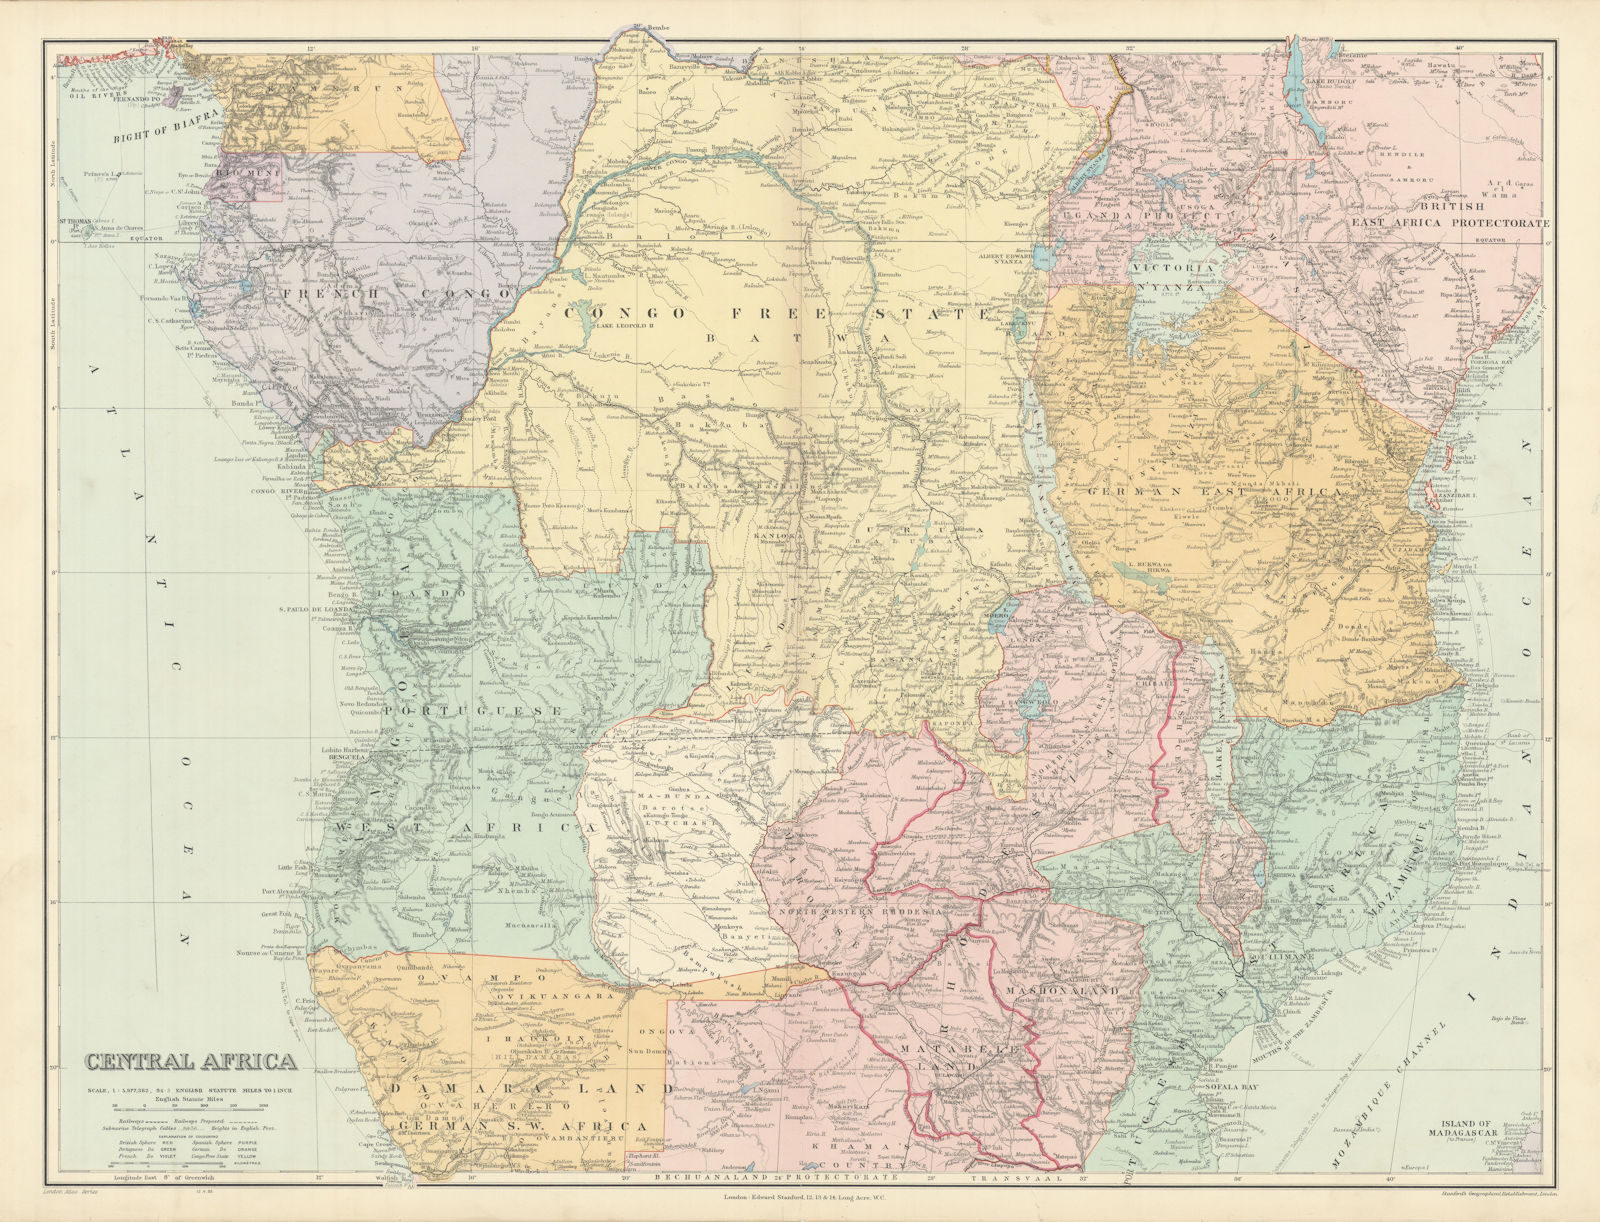 Associate Product Central Africa. Congo Free State Rhodesia German East Africa. STANFORD 1904 map